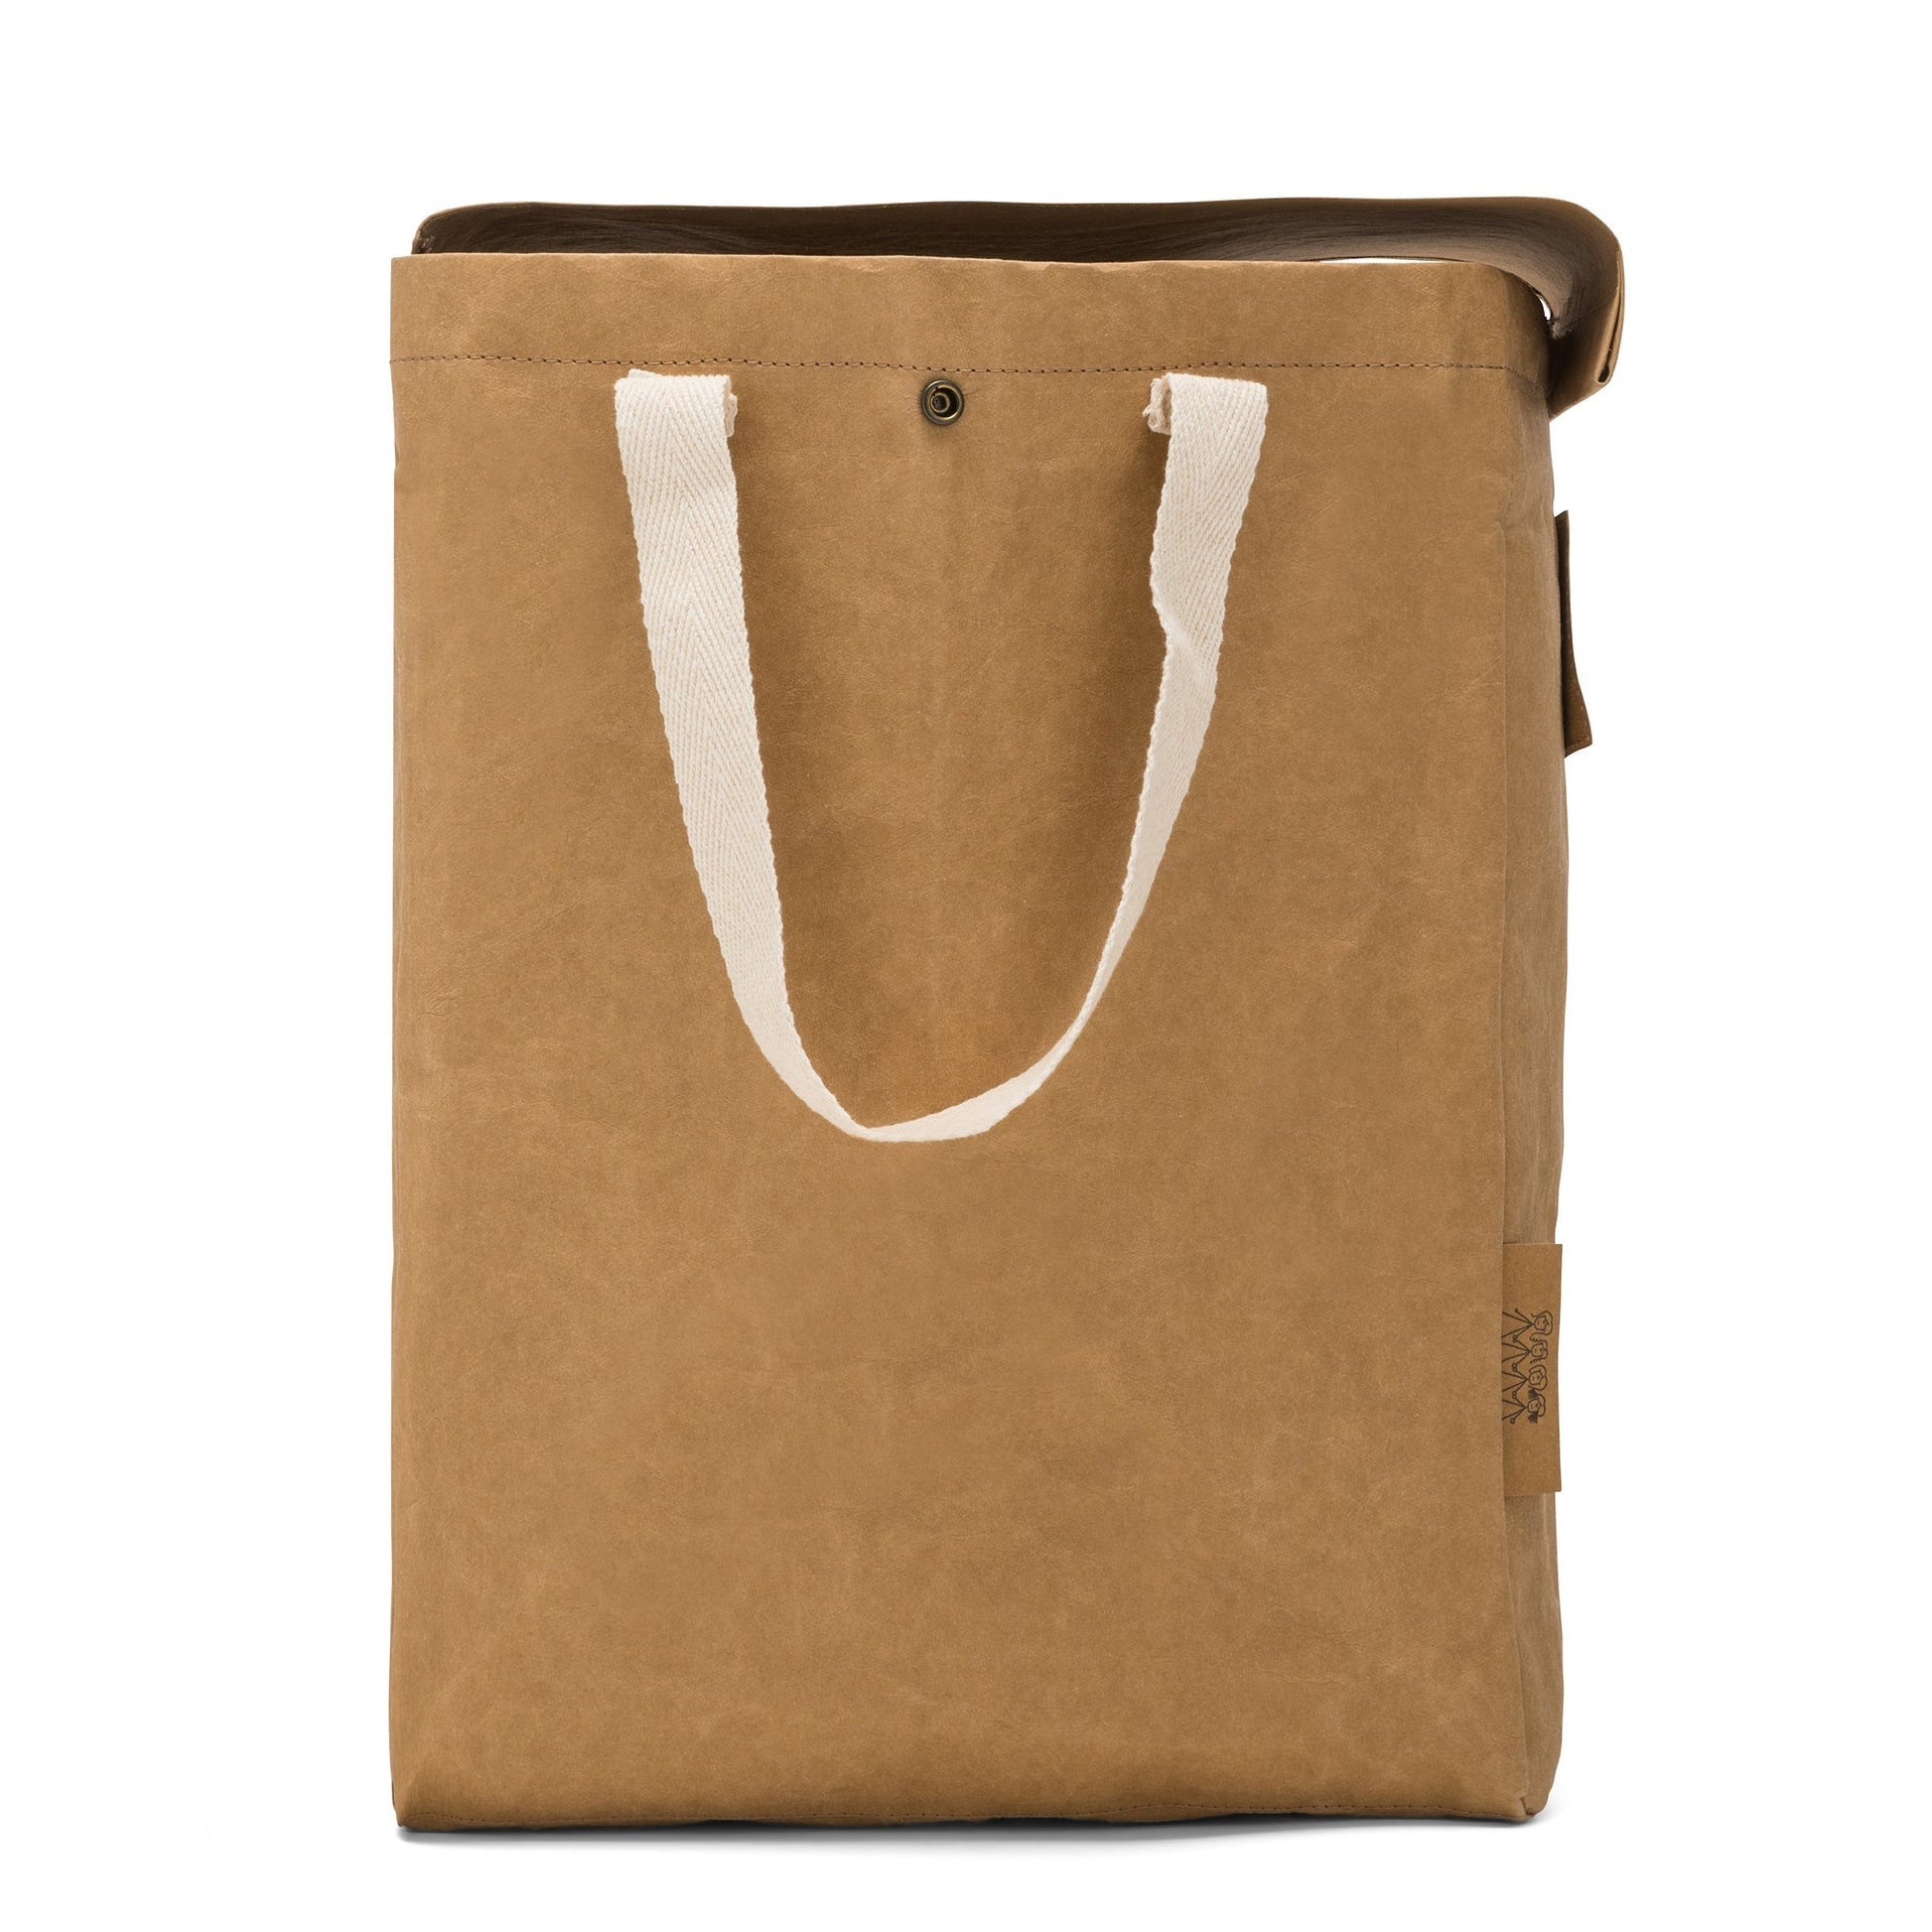 A washable paper recycling bag is shown from the side. The bag has a washable paper  lid which is attached, a washable paper tag attached to the front by two metal studs, and two recycled cotton straps - one on each side. There is a metal stud on the side at the top to attach to another washable paper recycling bag. The bag shown is tan.